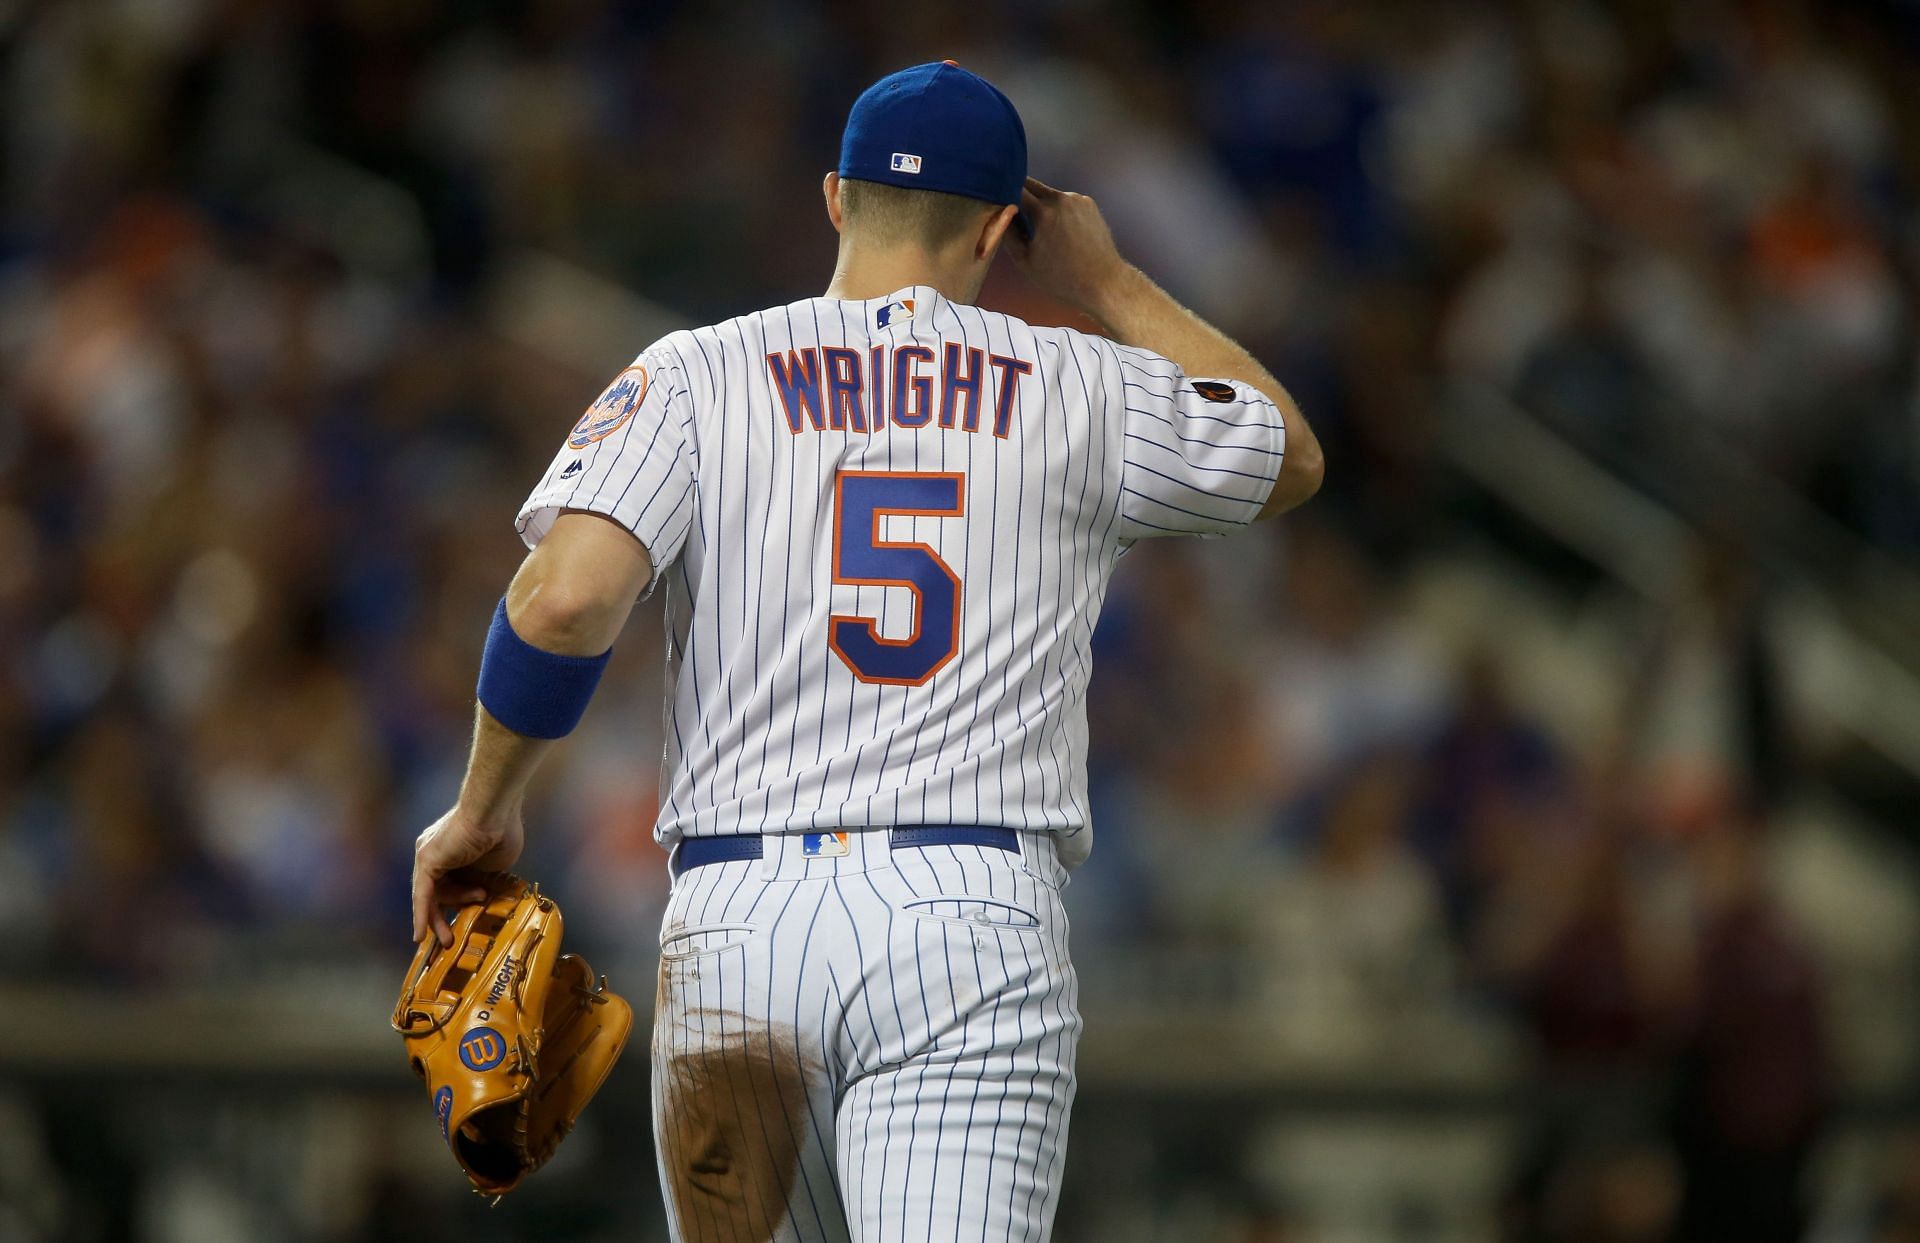 David Wright set Mets standard off the field as much as on it